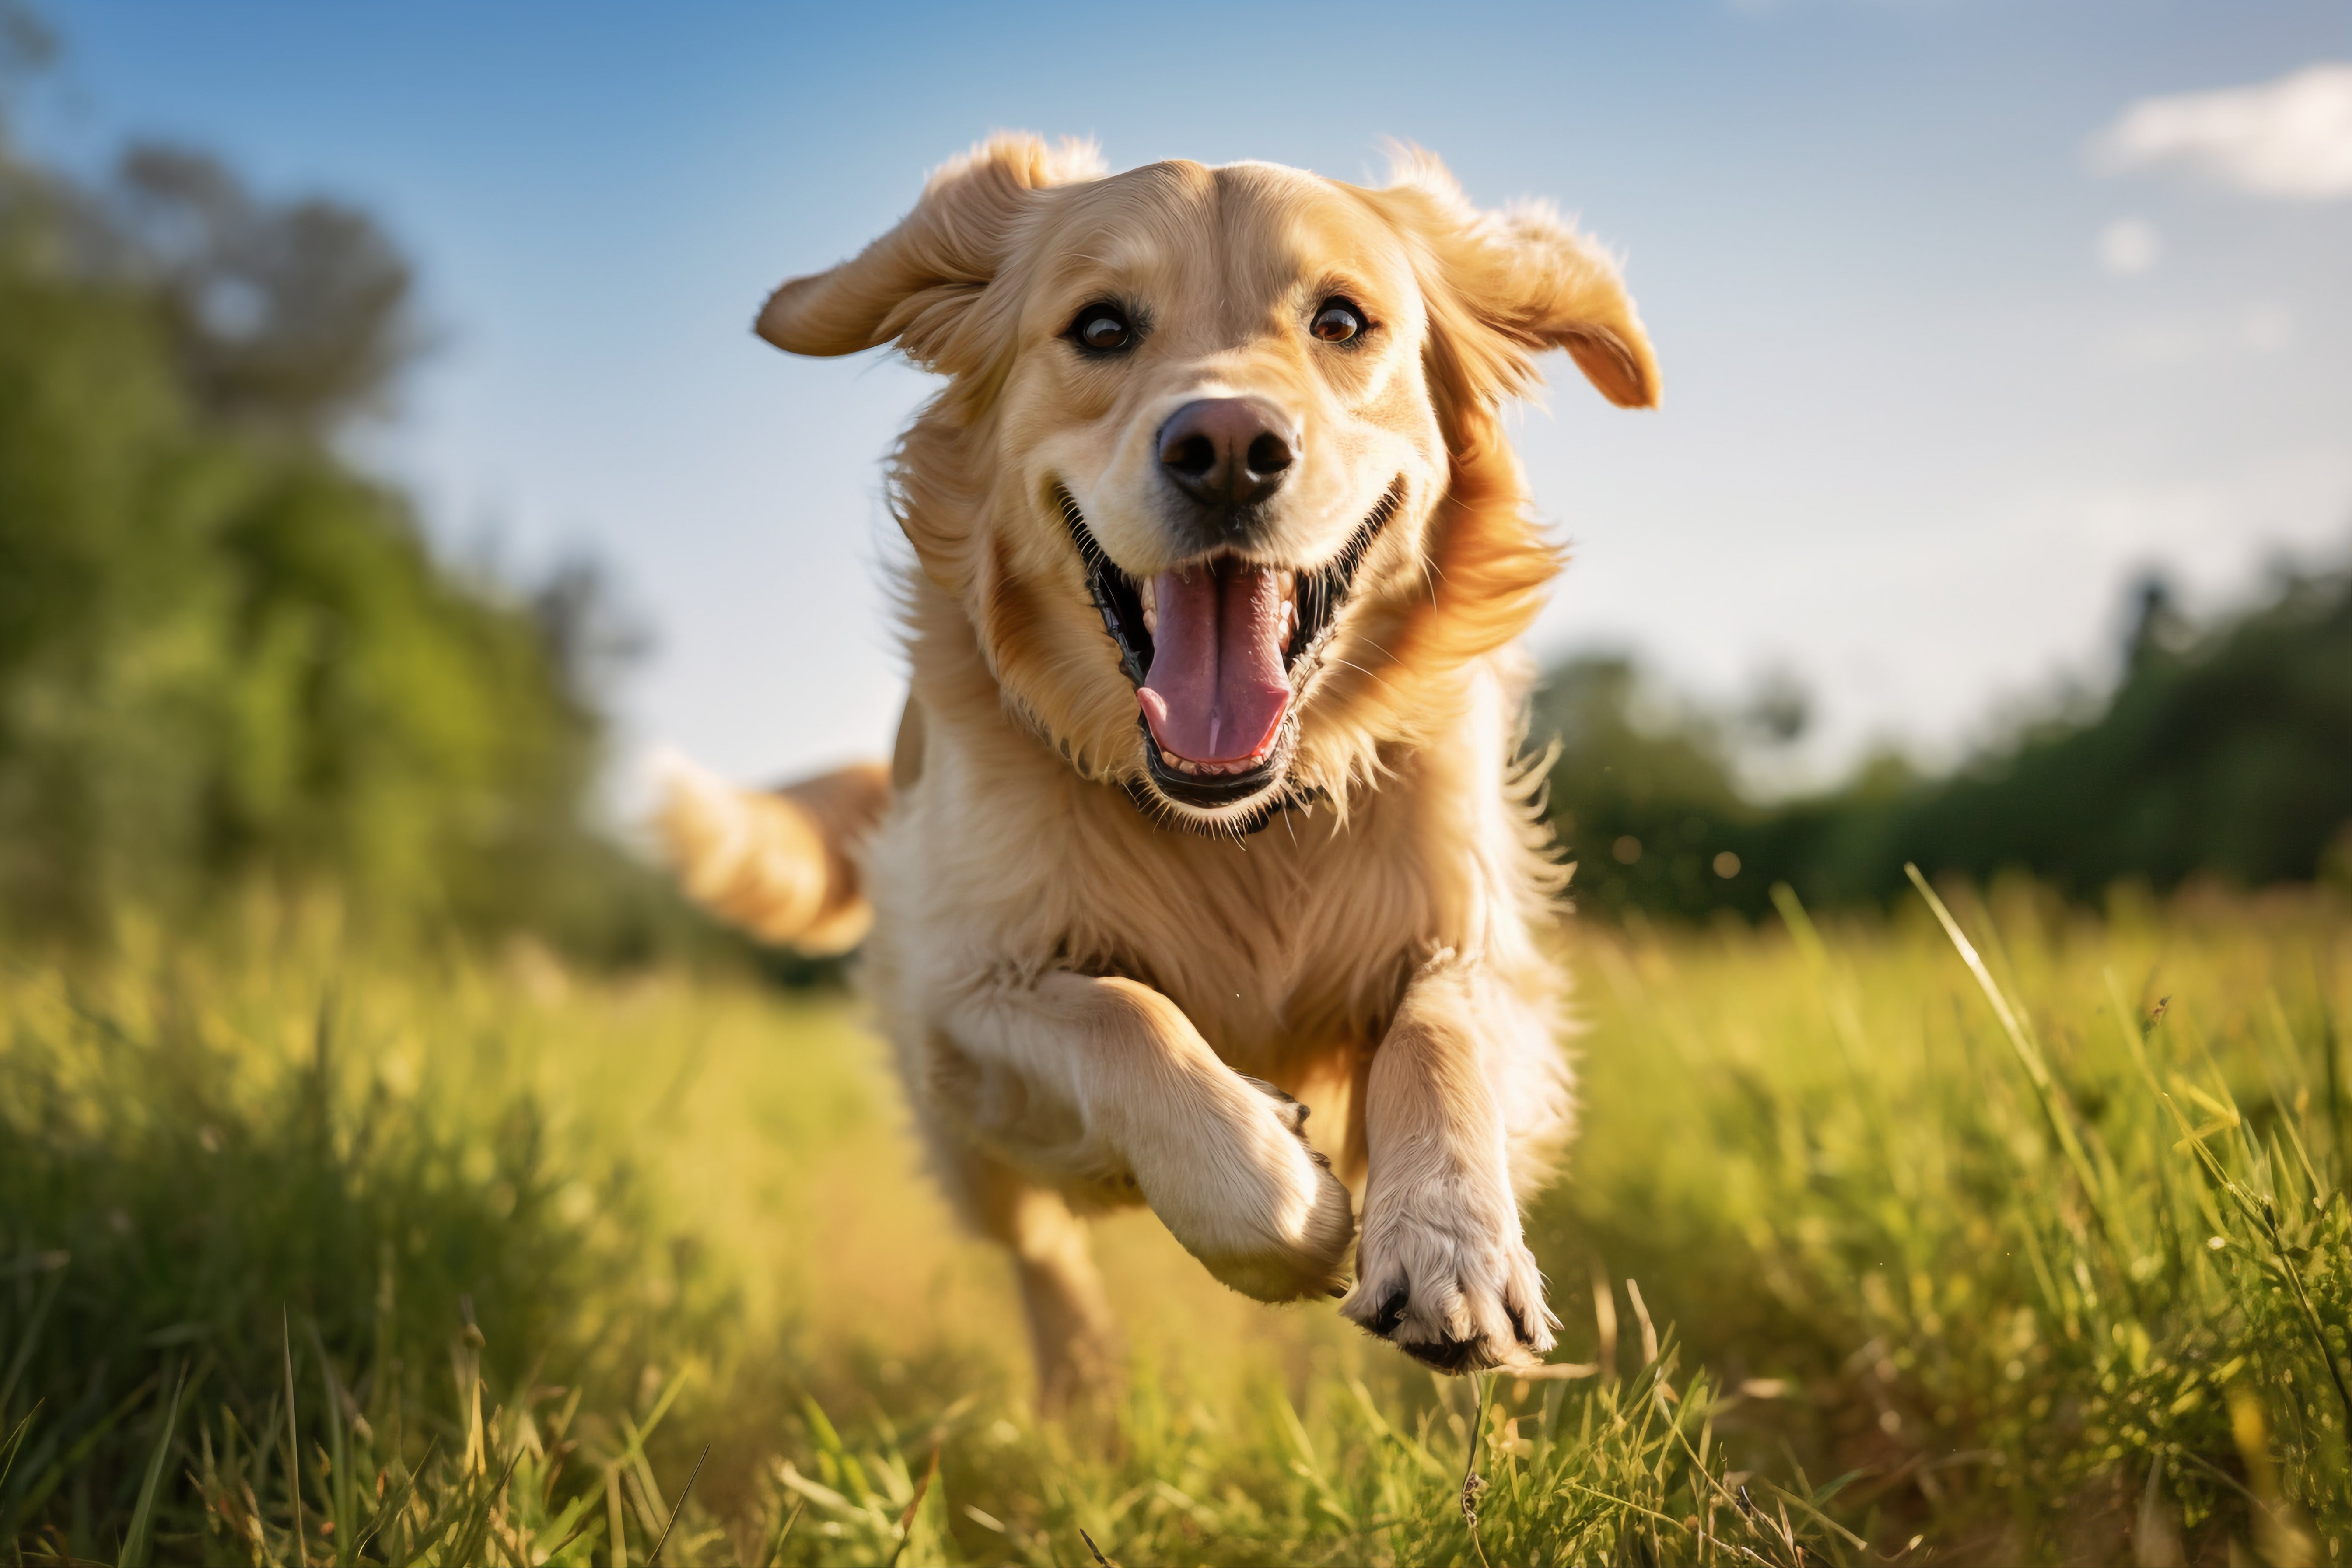 5 Unexpected Ways Dogs Make Us Happier and Healthier